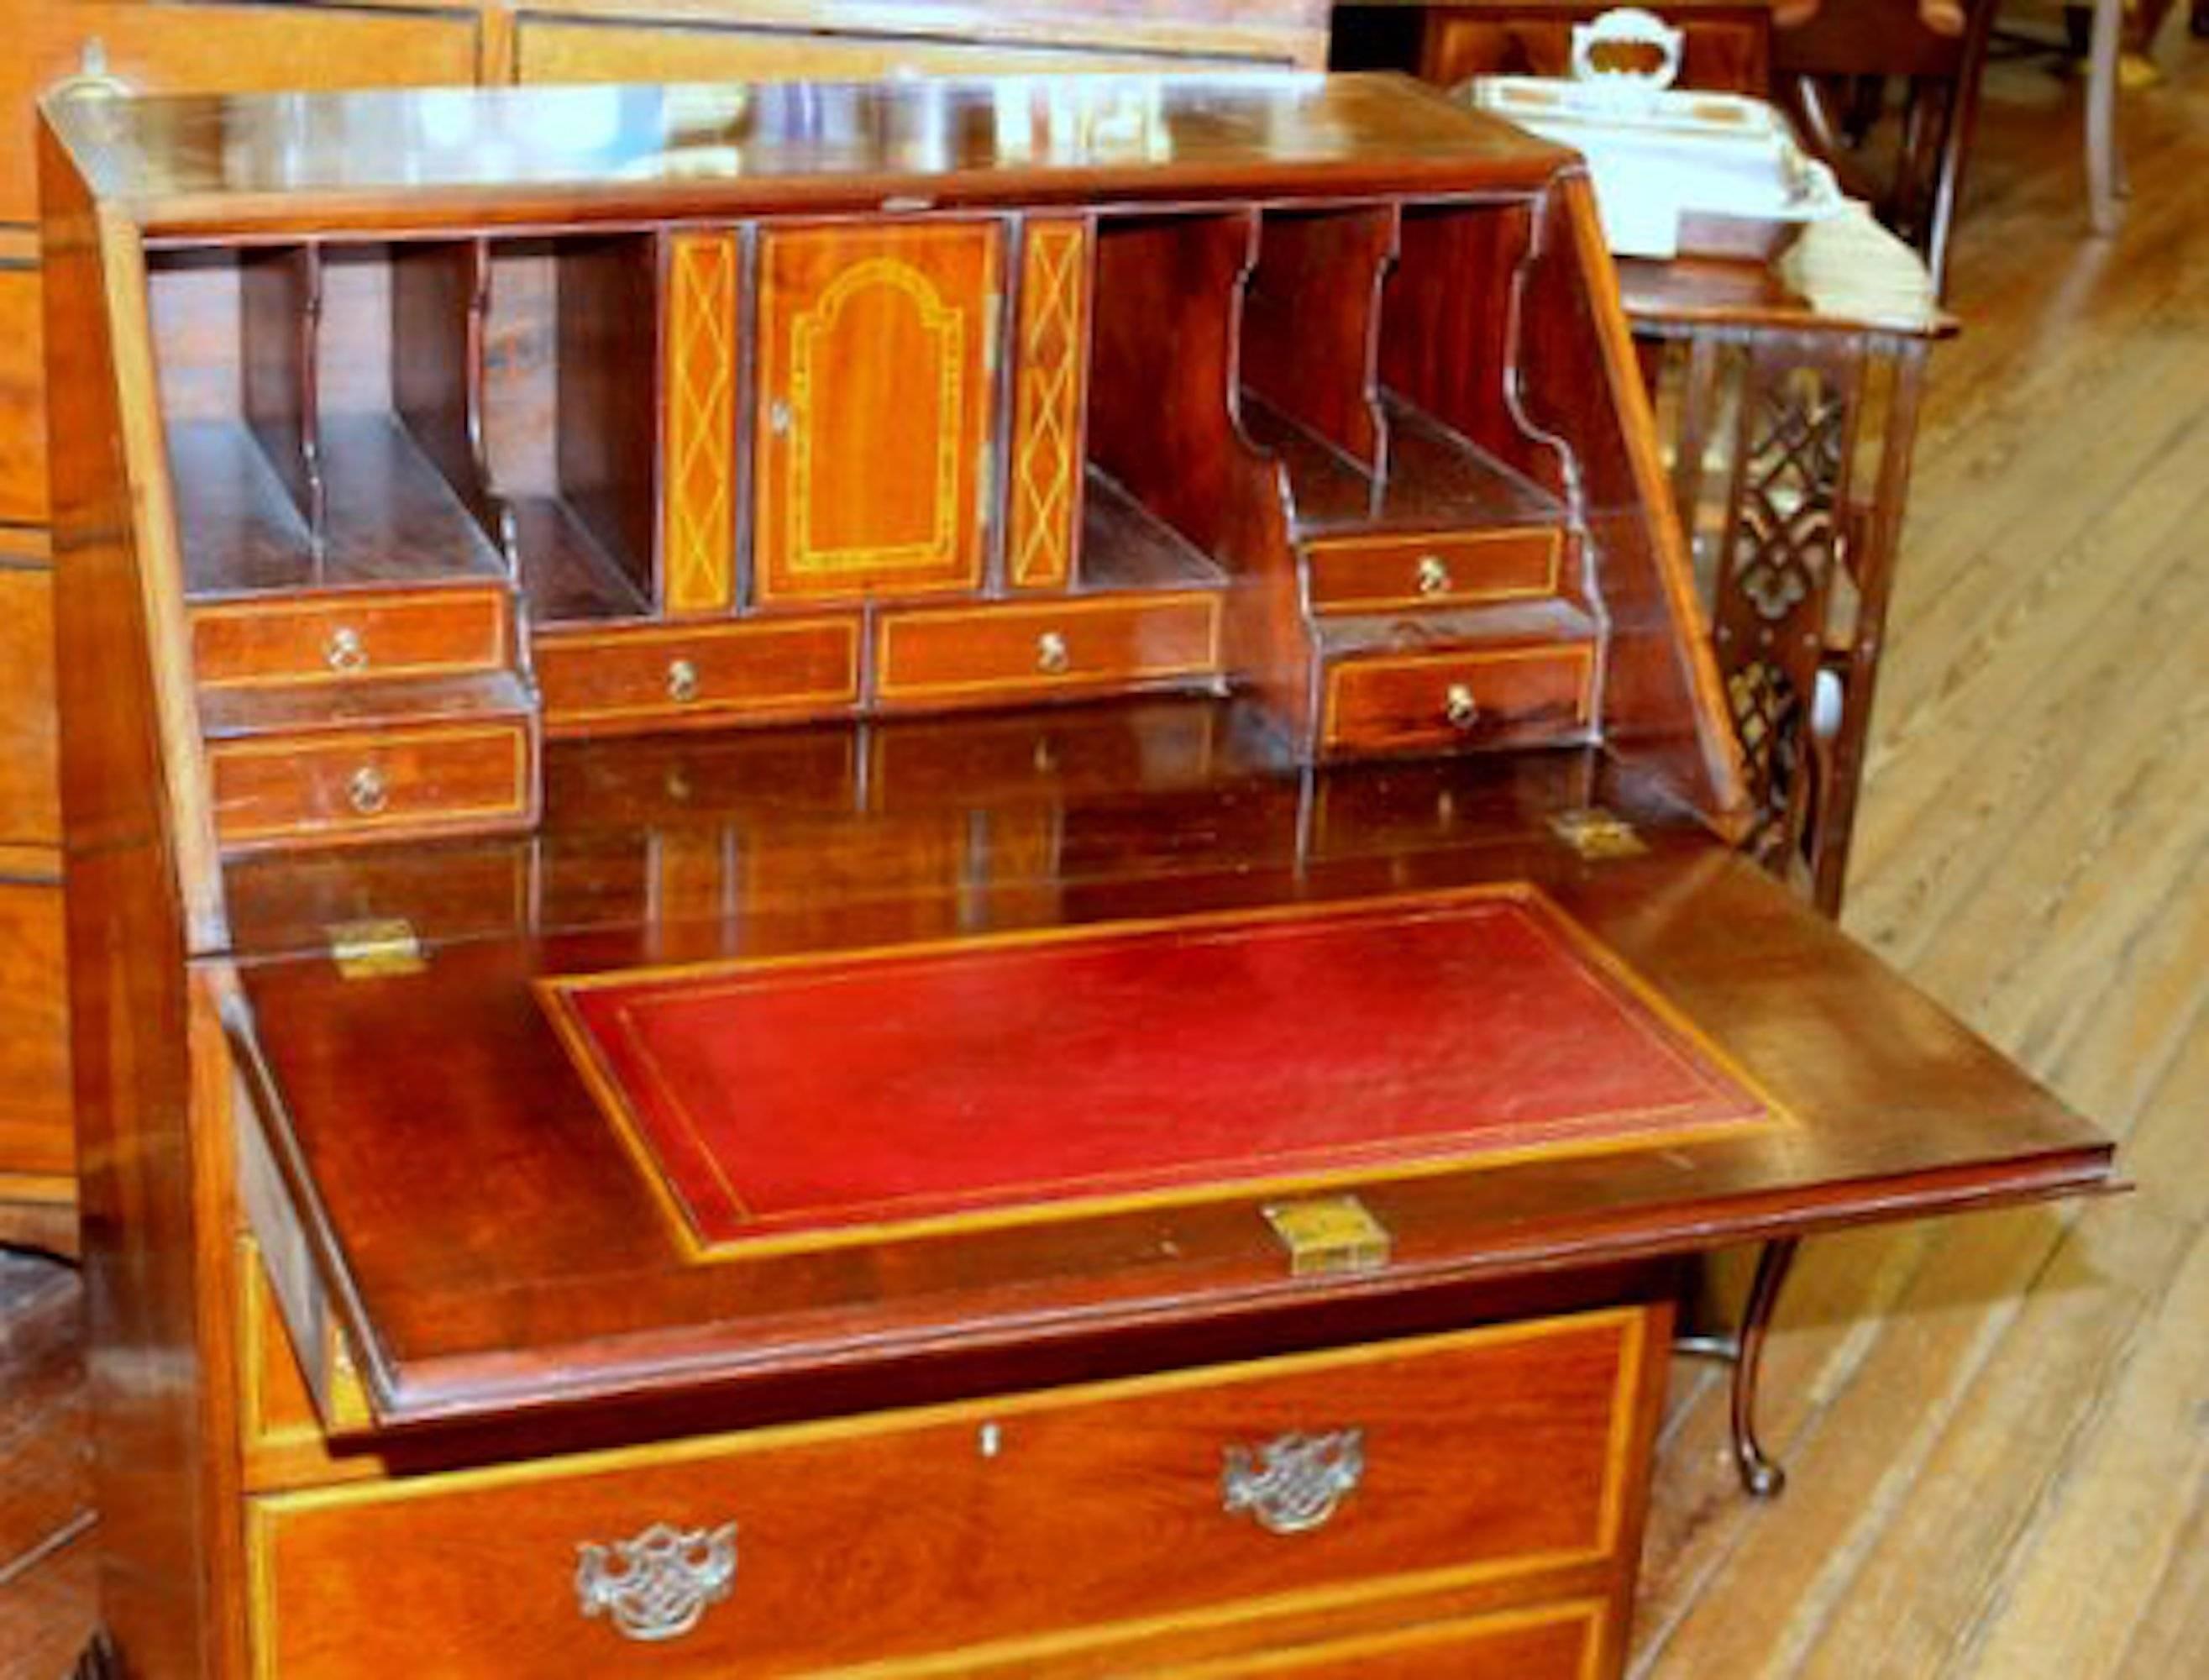 Exceptional quality antique English fabulously inlaid figured mahogany Georgian style small slant-front bureau with handsome fitted interior and leather writing surface

Please note extraordinary satinwood and rosewood inlays throughout, in